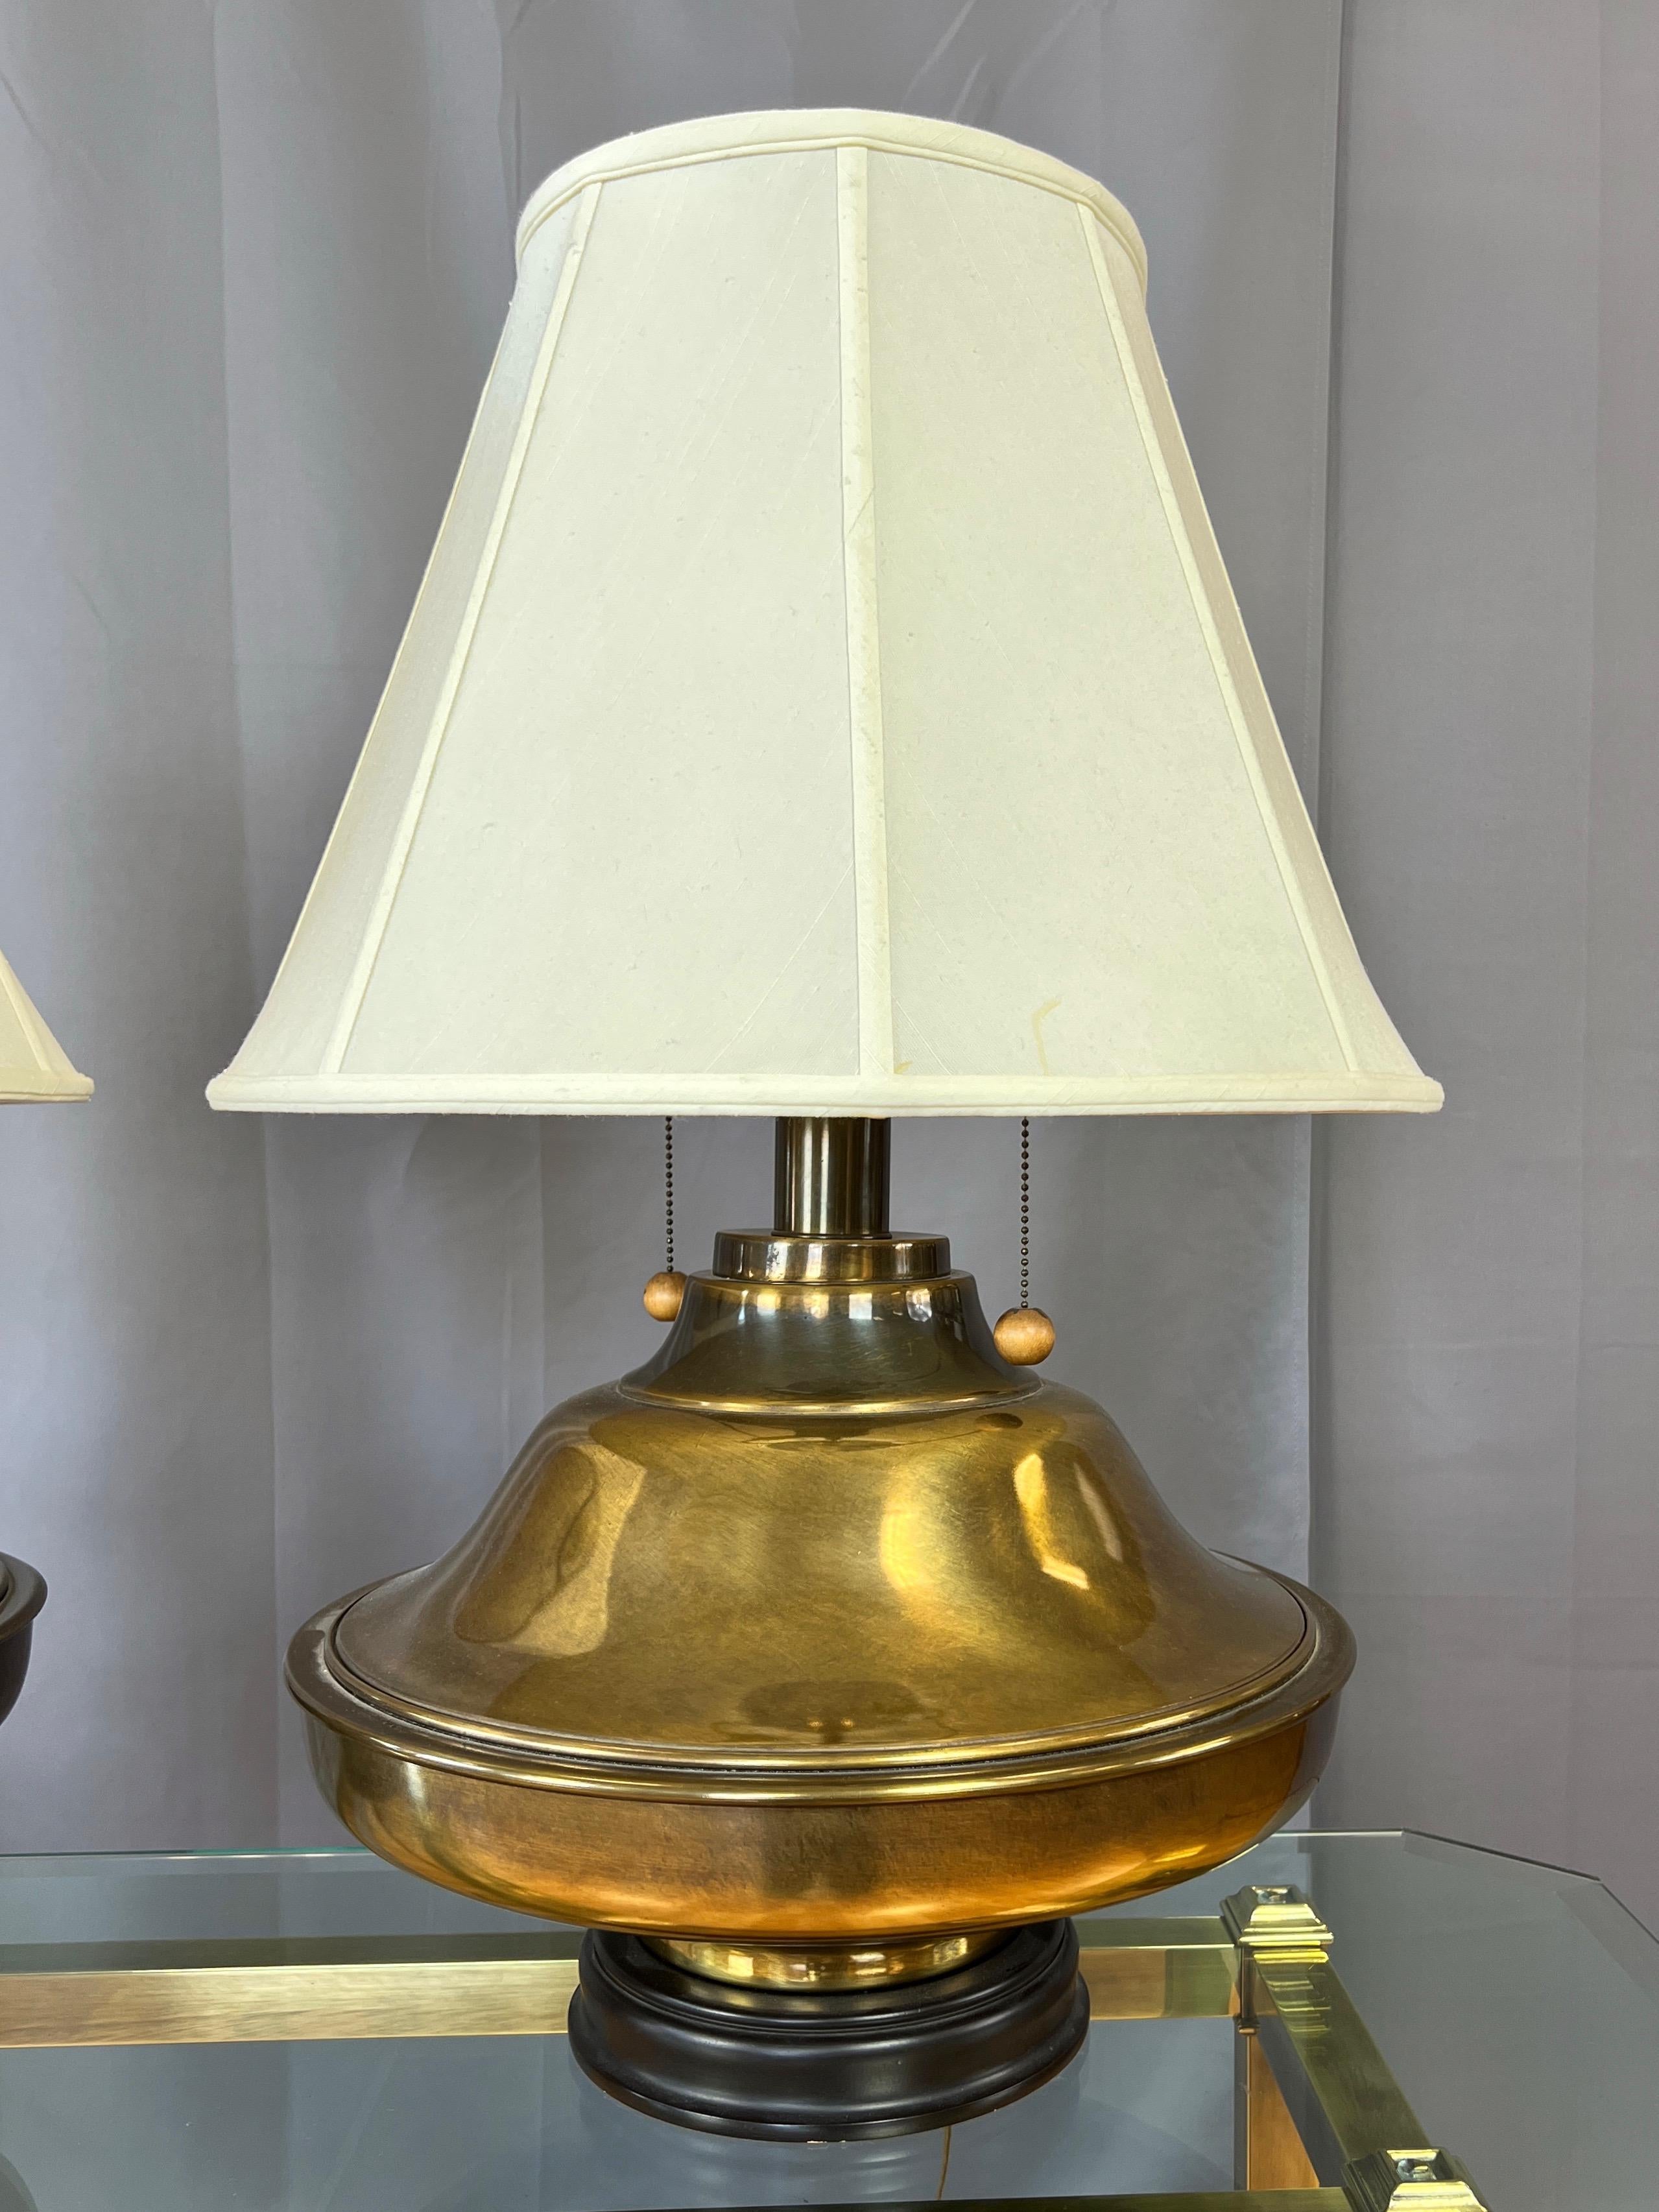 Pair of Monumental Marbro-Style Antiqued Brass Table Lamps with Shades, 1960s In Good Condition For Sale In San Francisco, CA